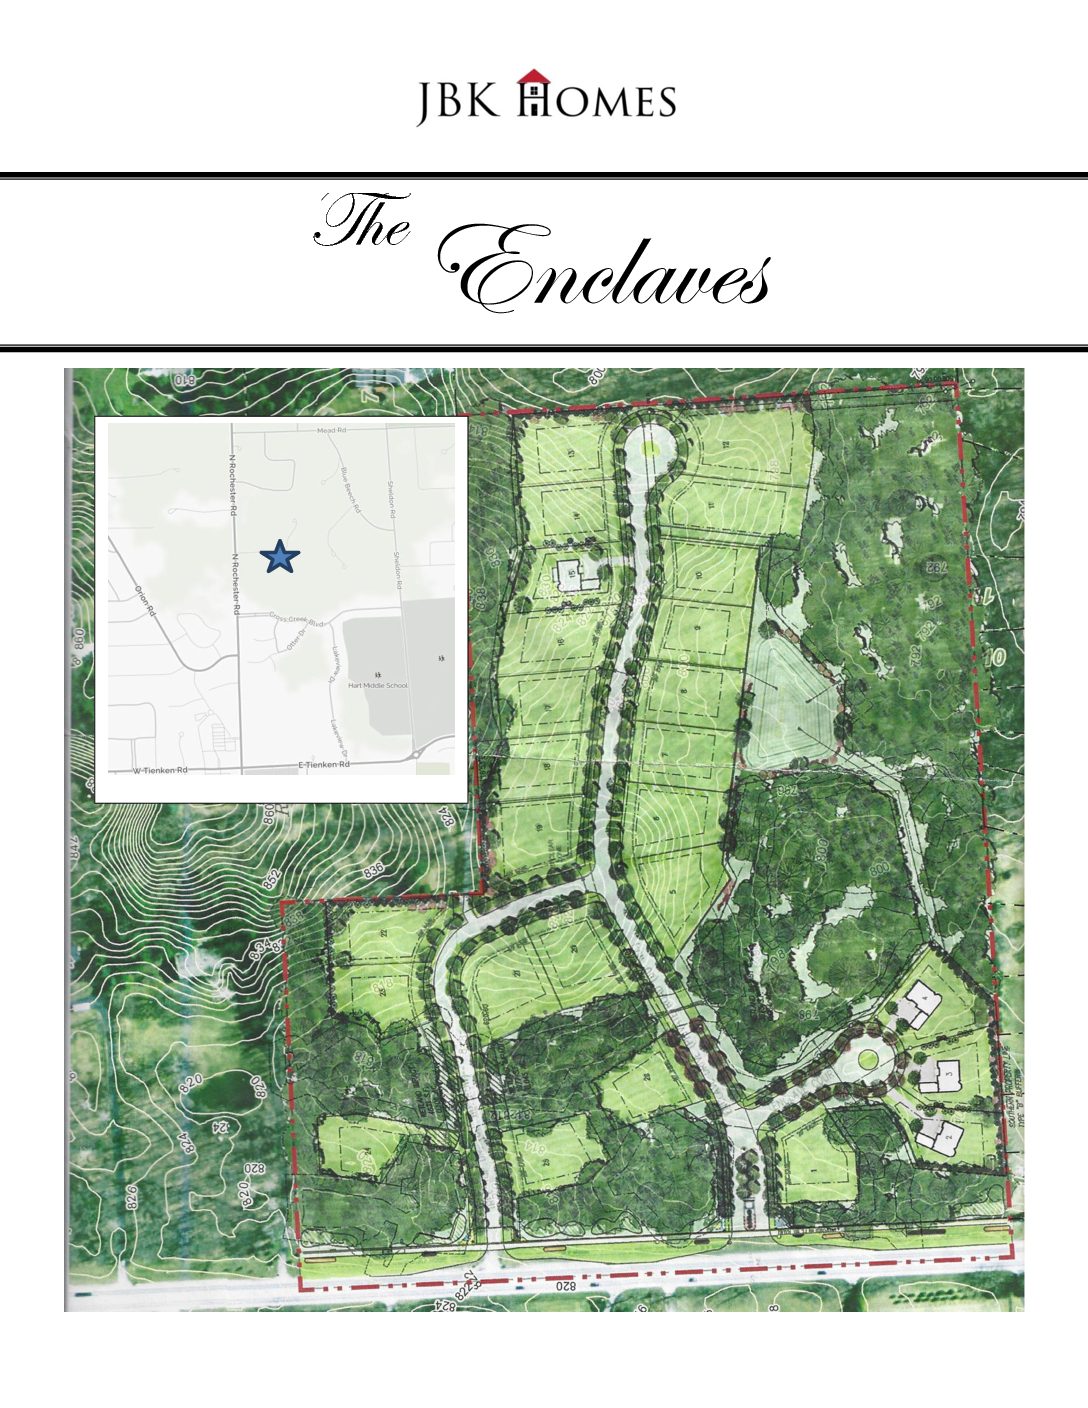 Rochester Enclaves_Site Plan